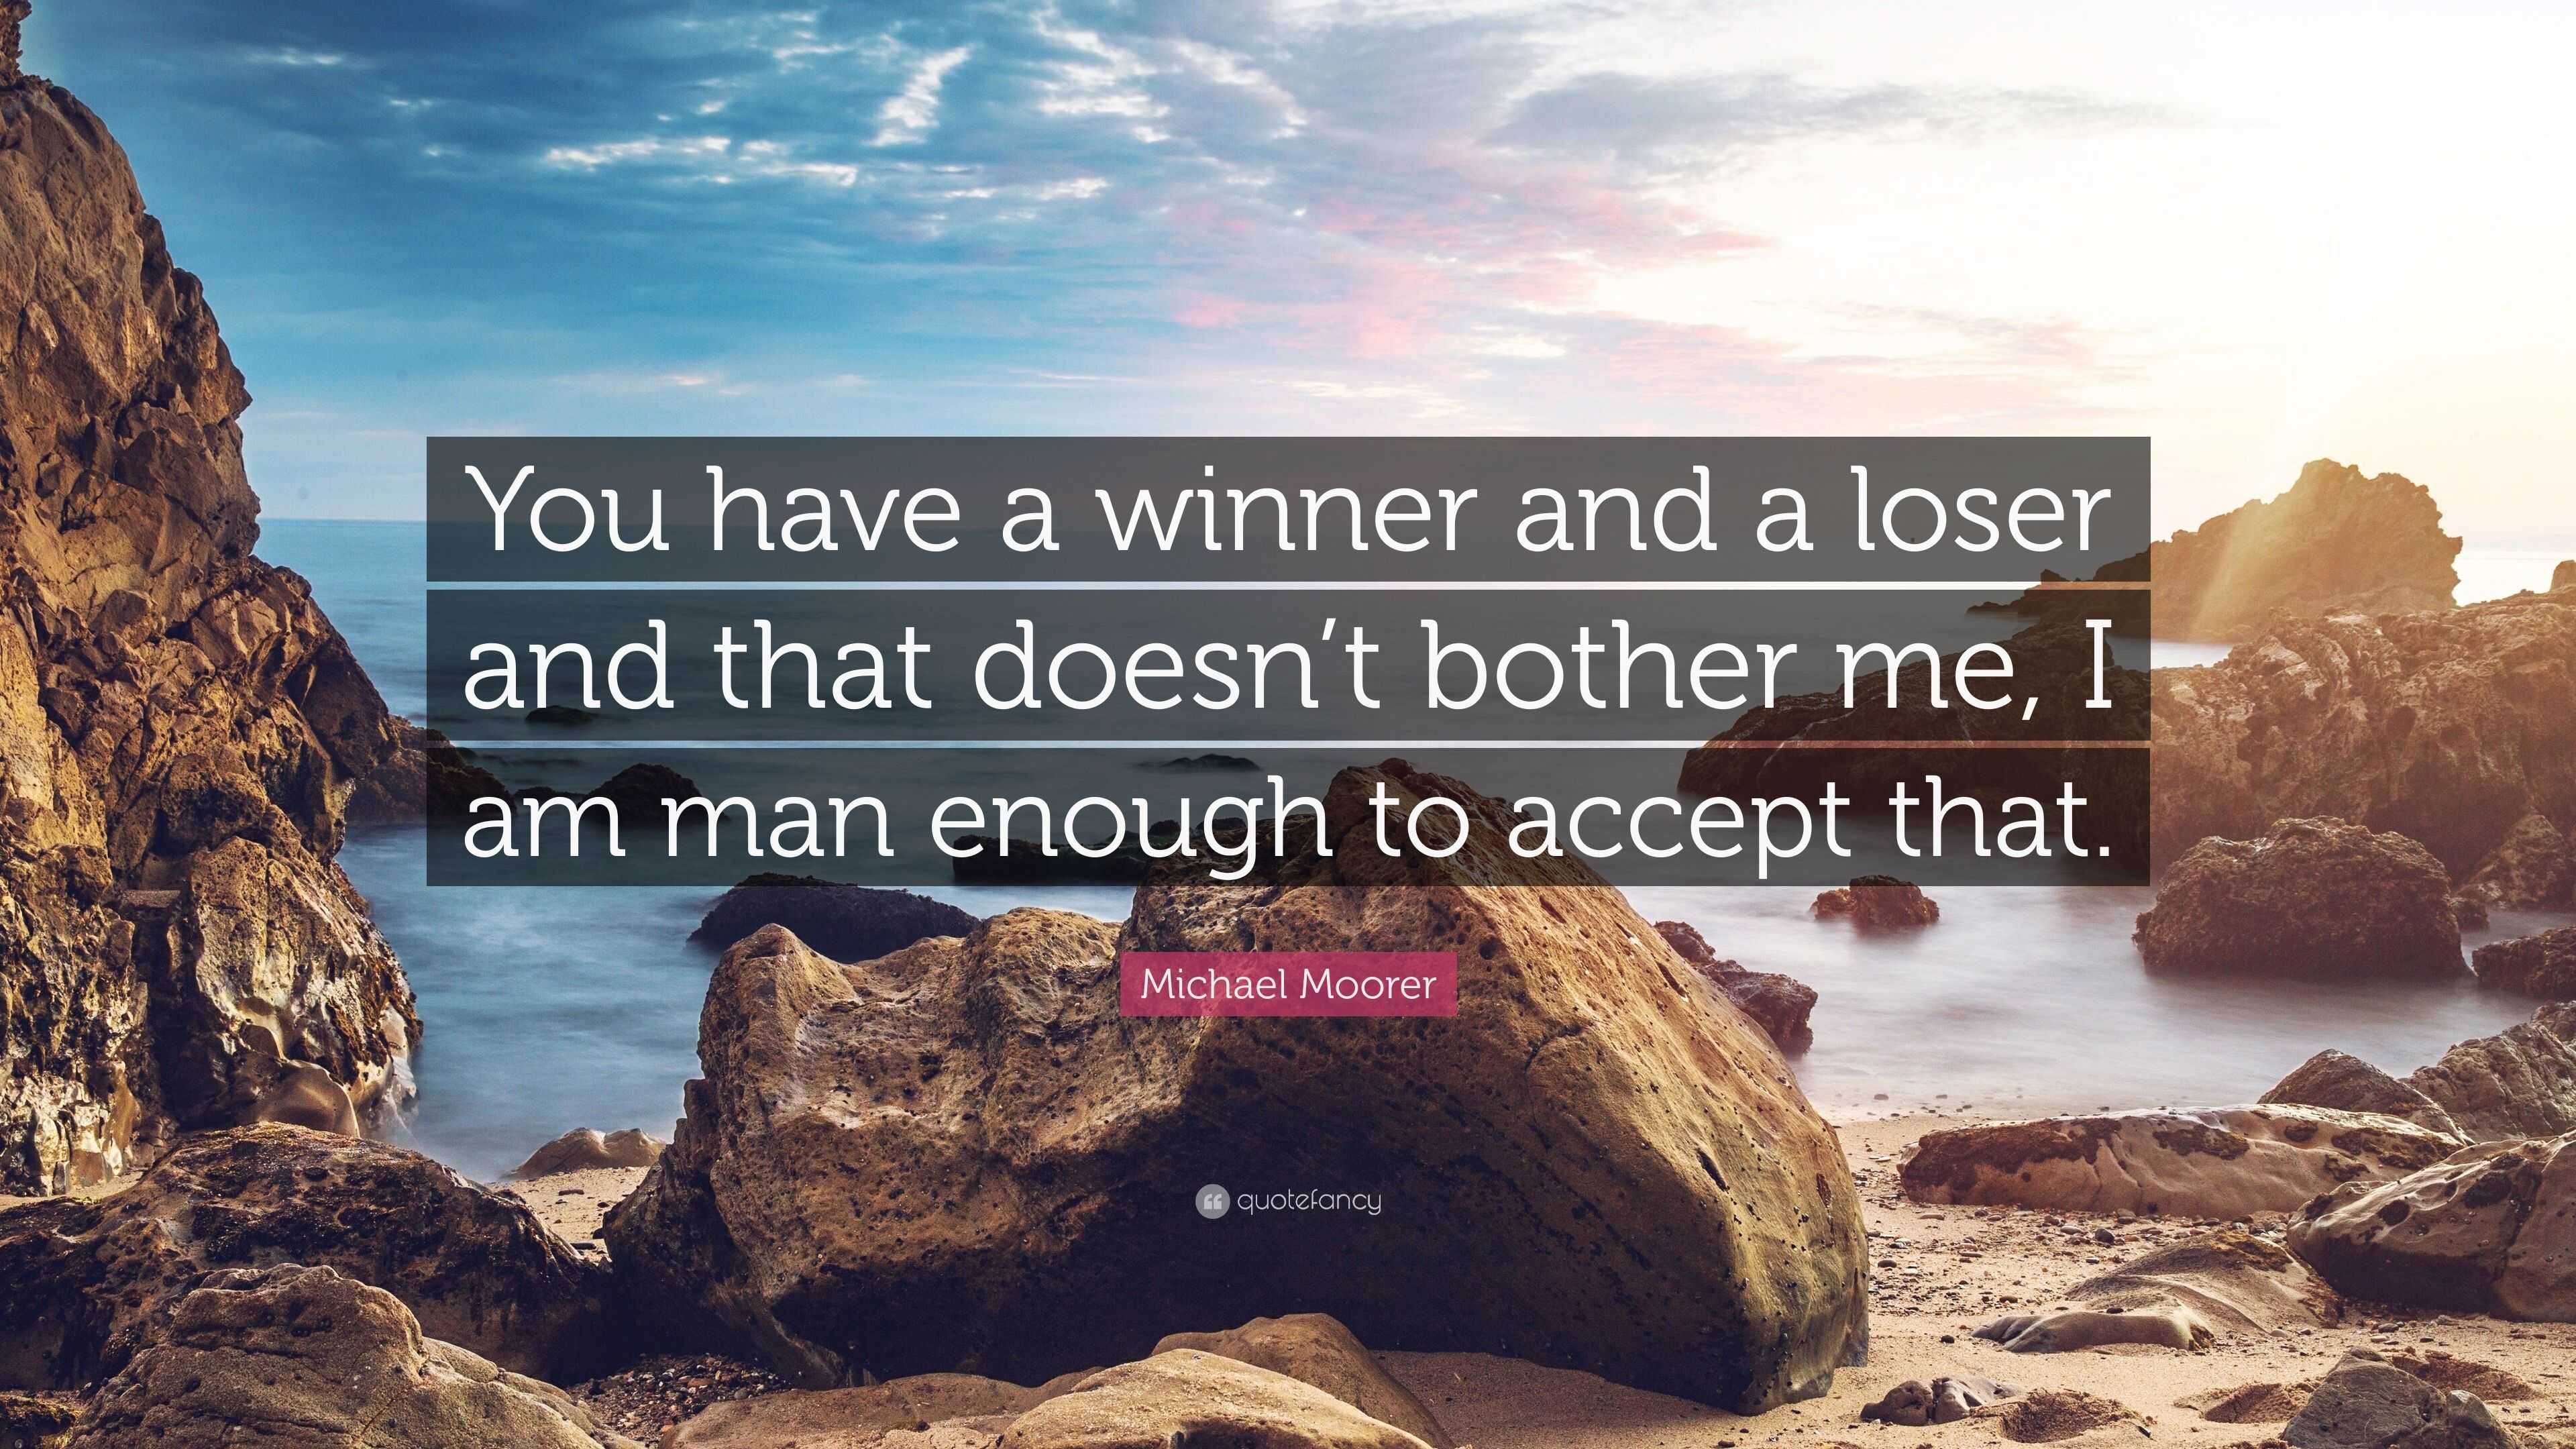 Michael Moorer Quote: “You have a winner and a loser and that doesn't  bother me,